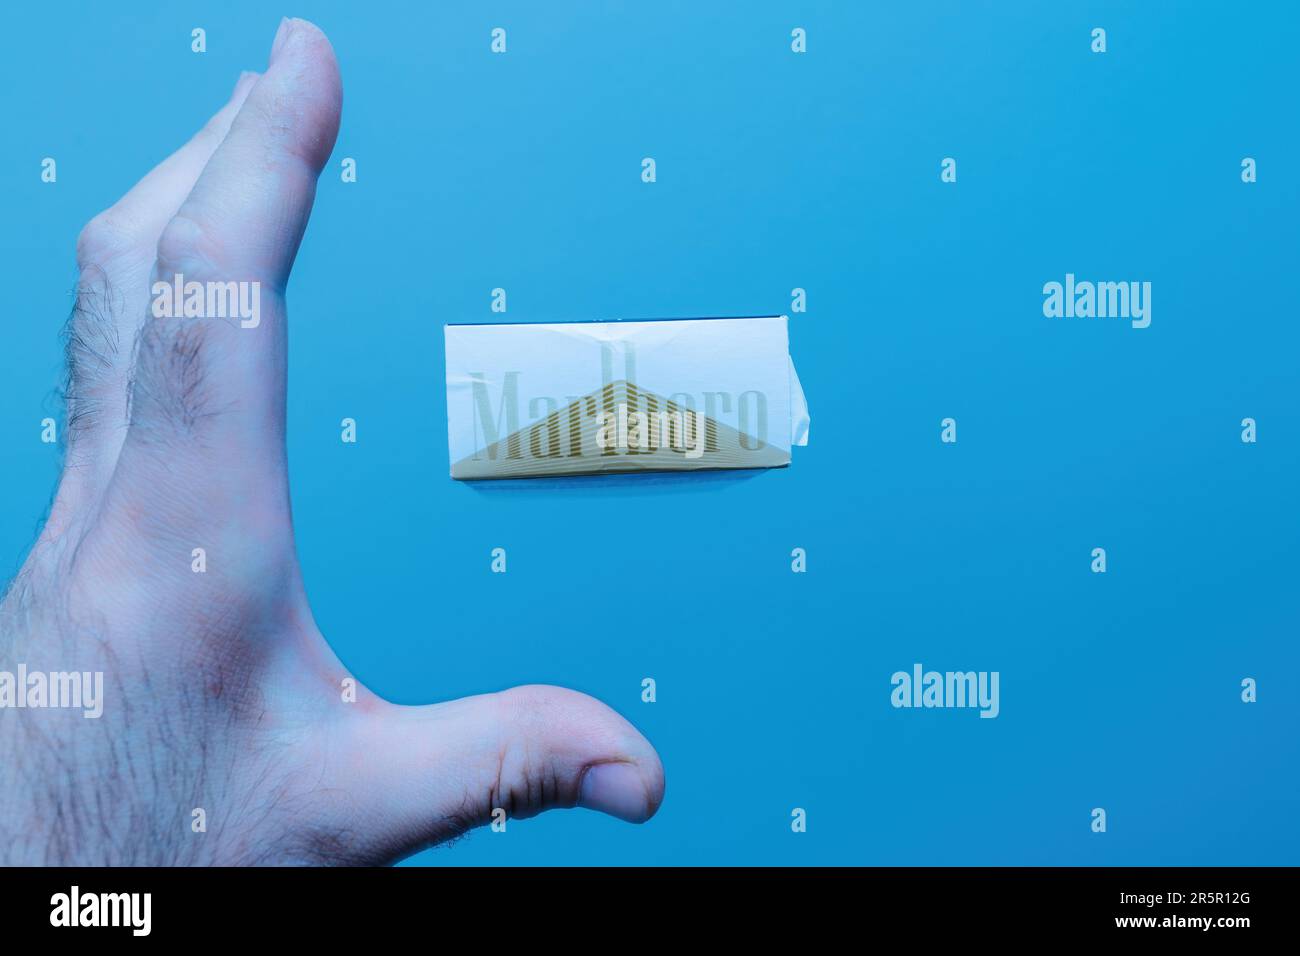 Paris, France - May 30, 2023: Someone is reaching for a Marlboro pack floating in the air against a blue background. A concerning commentary on unhealthy habits and tobacco use. Stock Photo